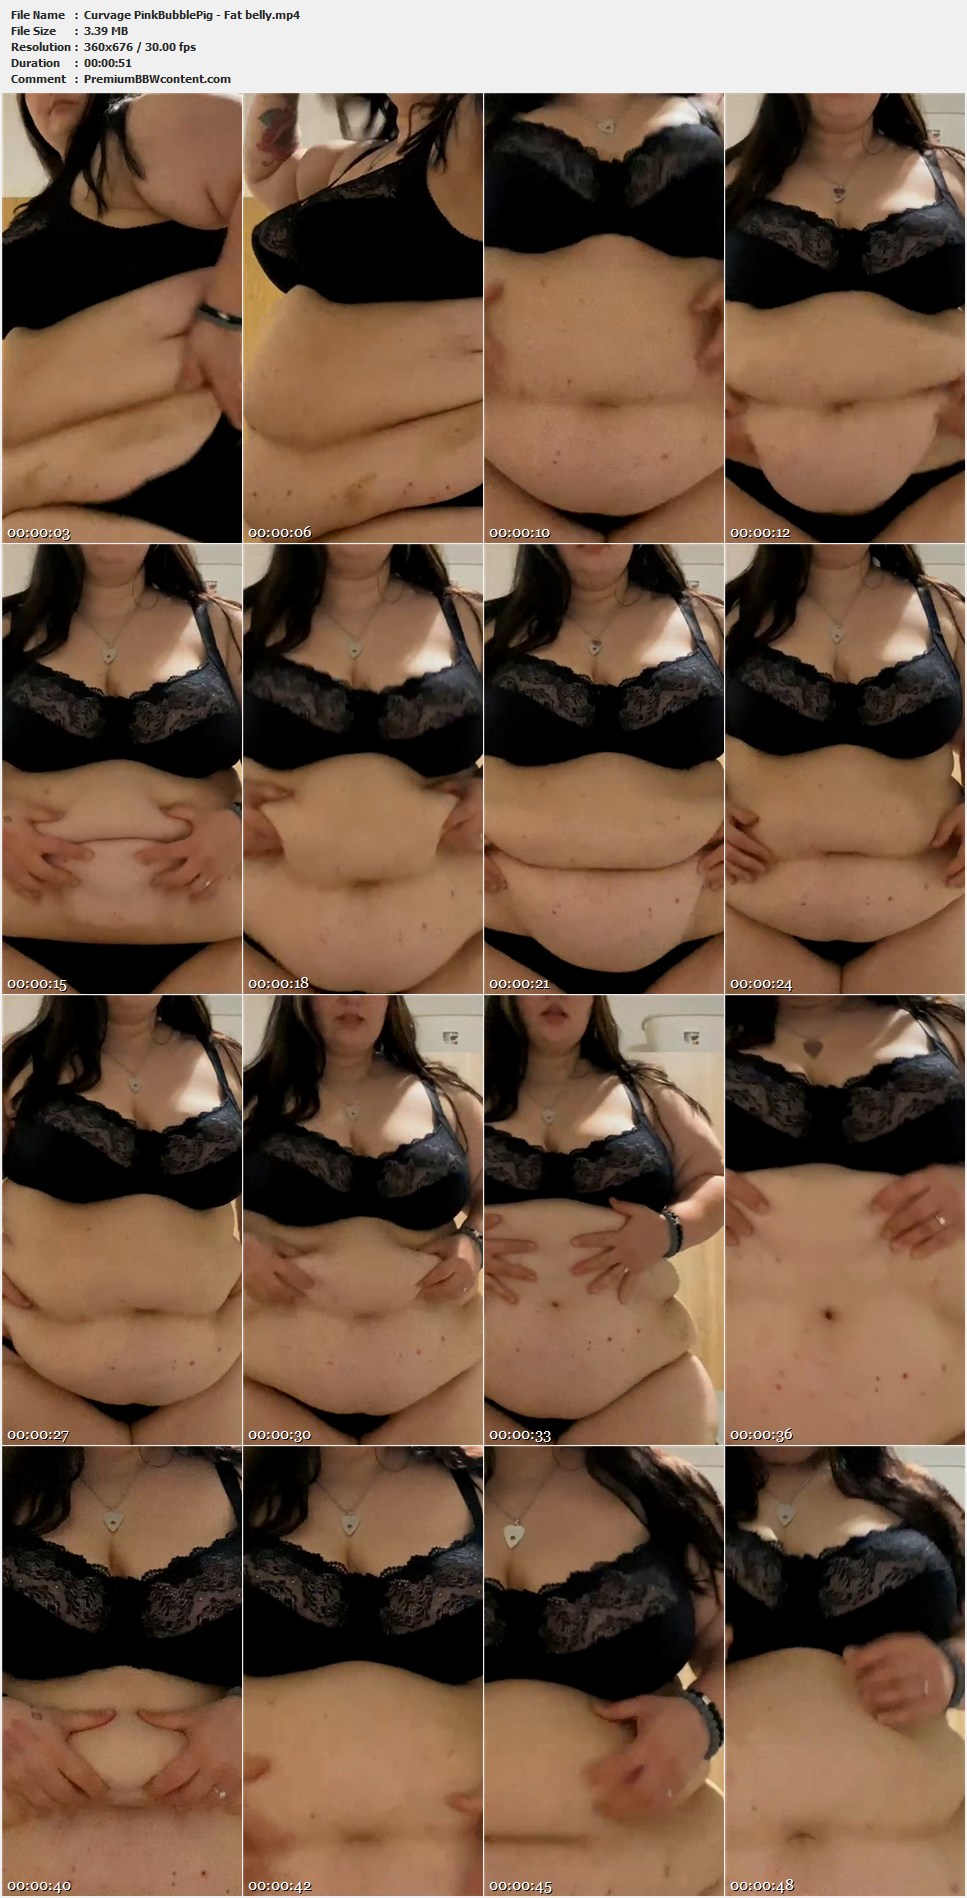 Curvage PinkBubblePig - Fat belly thumbnails